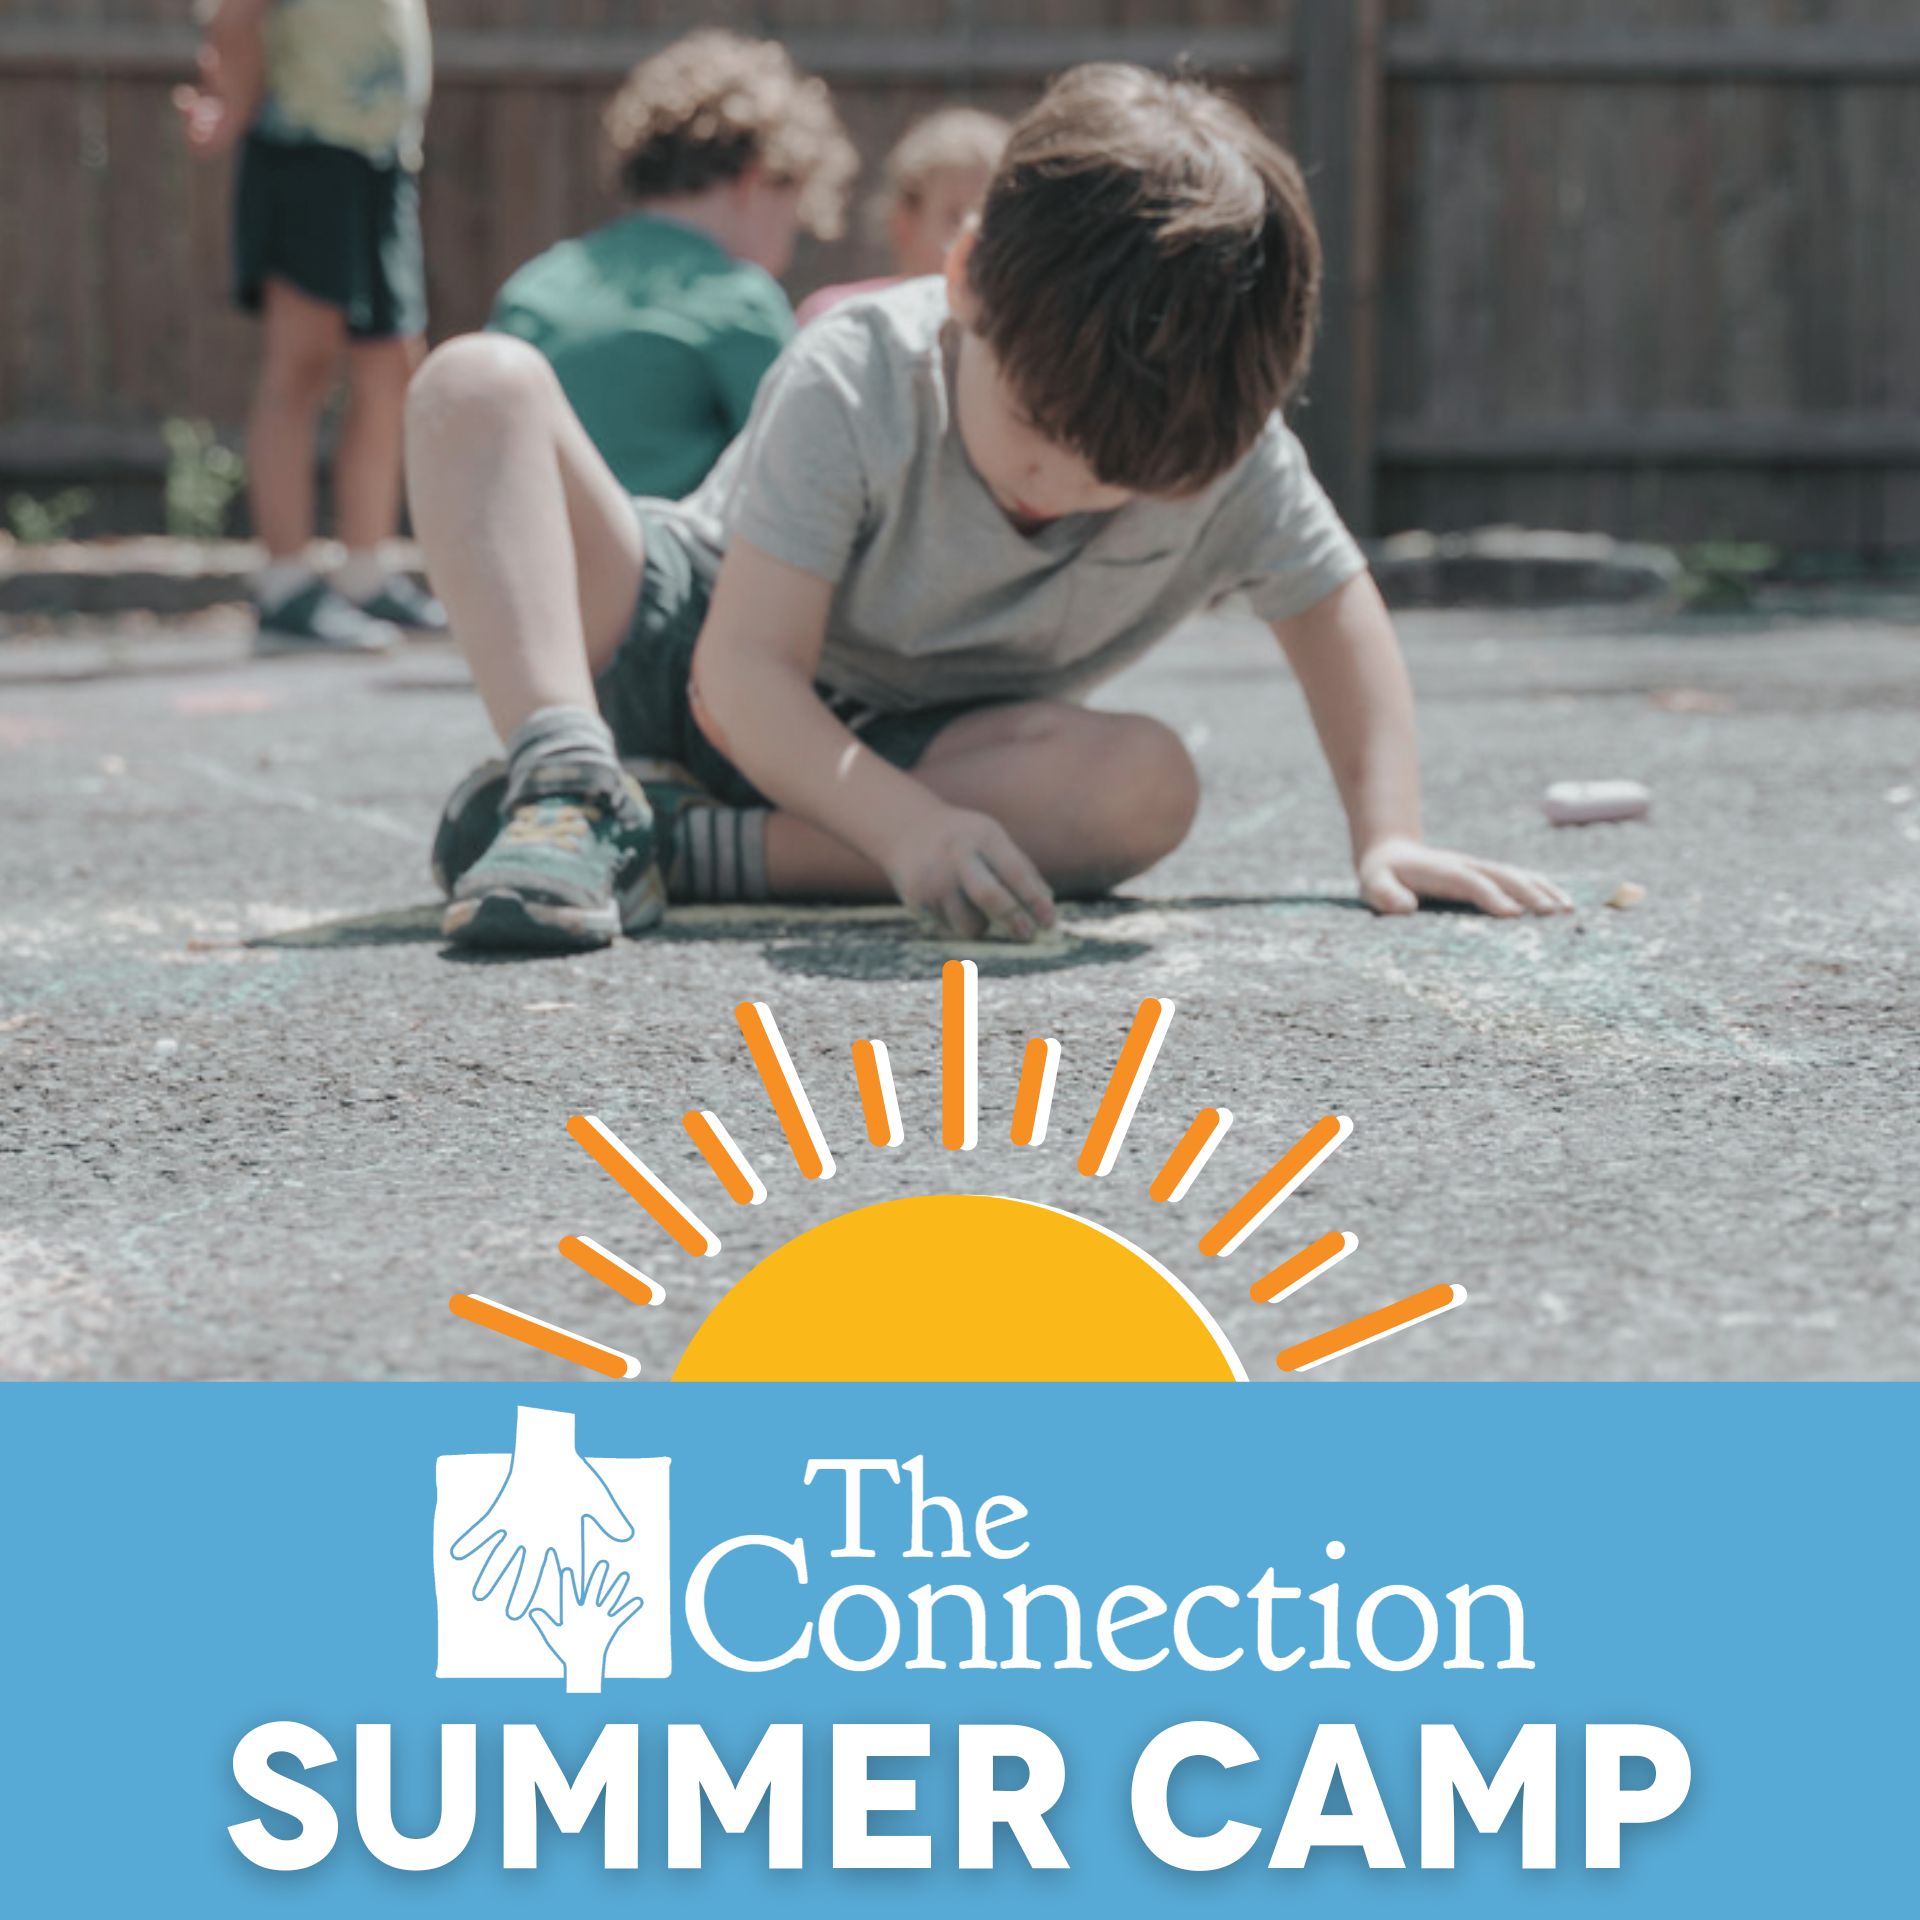 The Connection - Summit NJ - SUMMER CAMP - photo of kids playing with chalk outside - a graphic of the sun